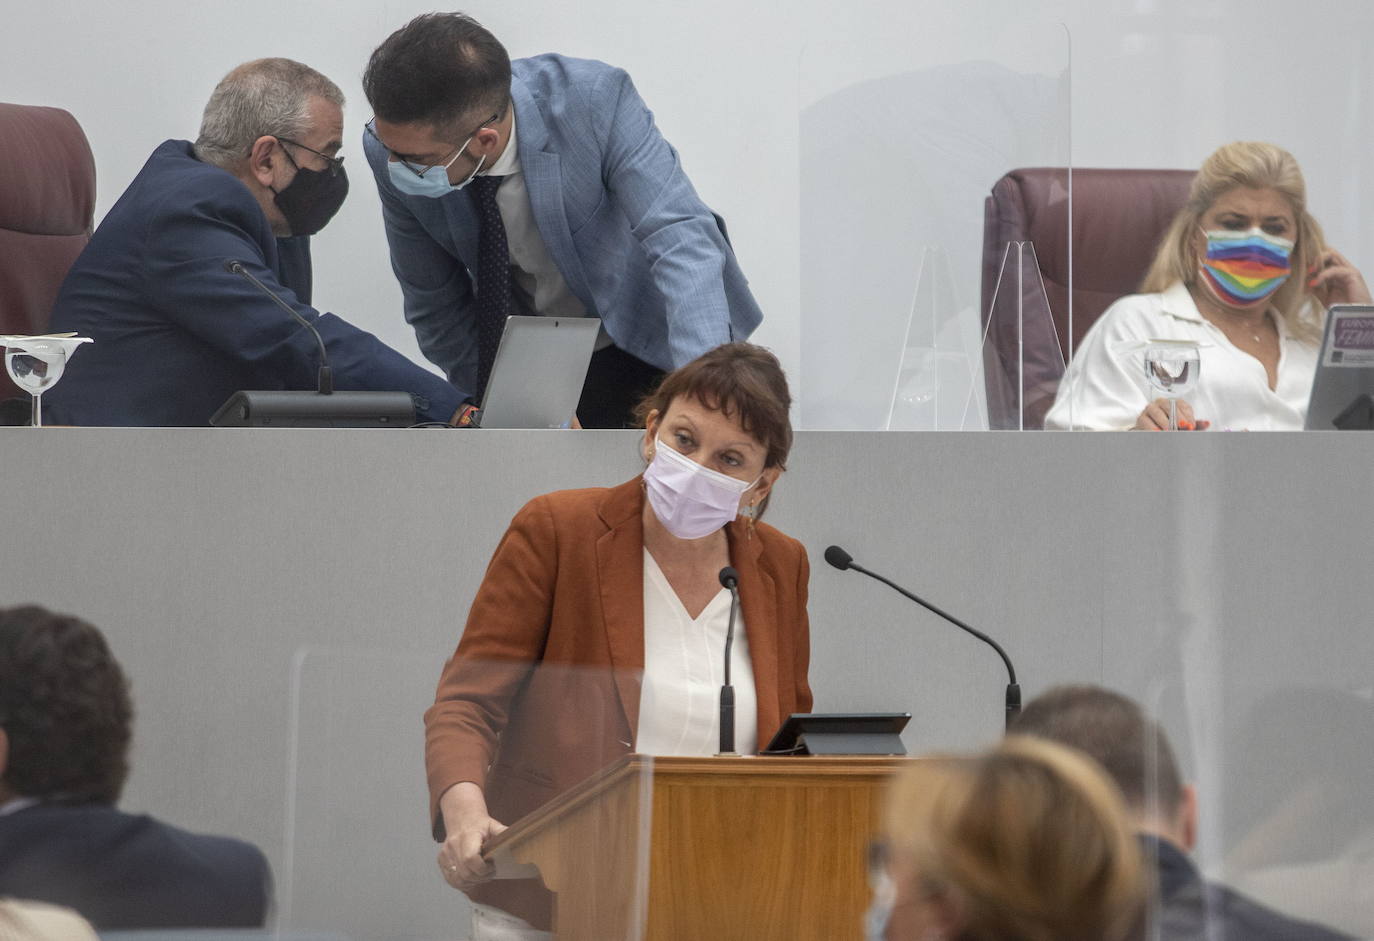 María Marín intervenes in the Assembly, in a file photo.